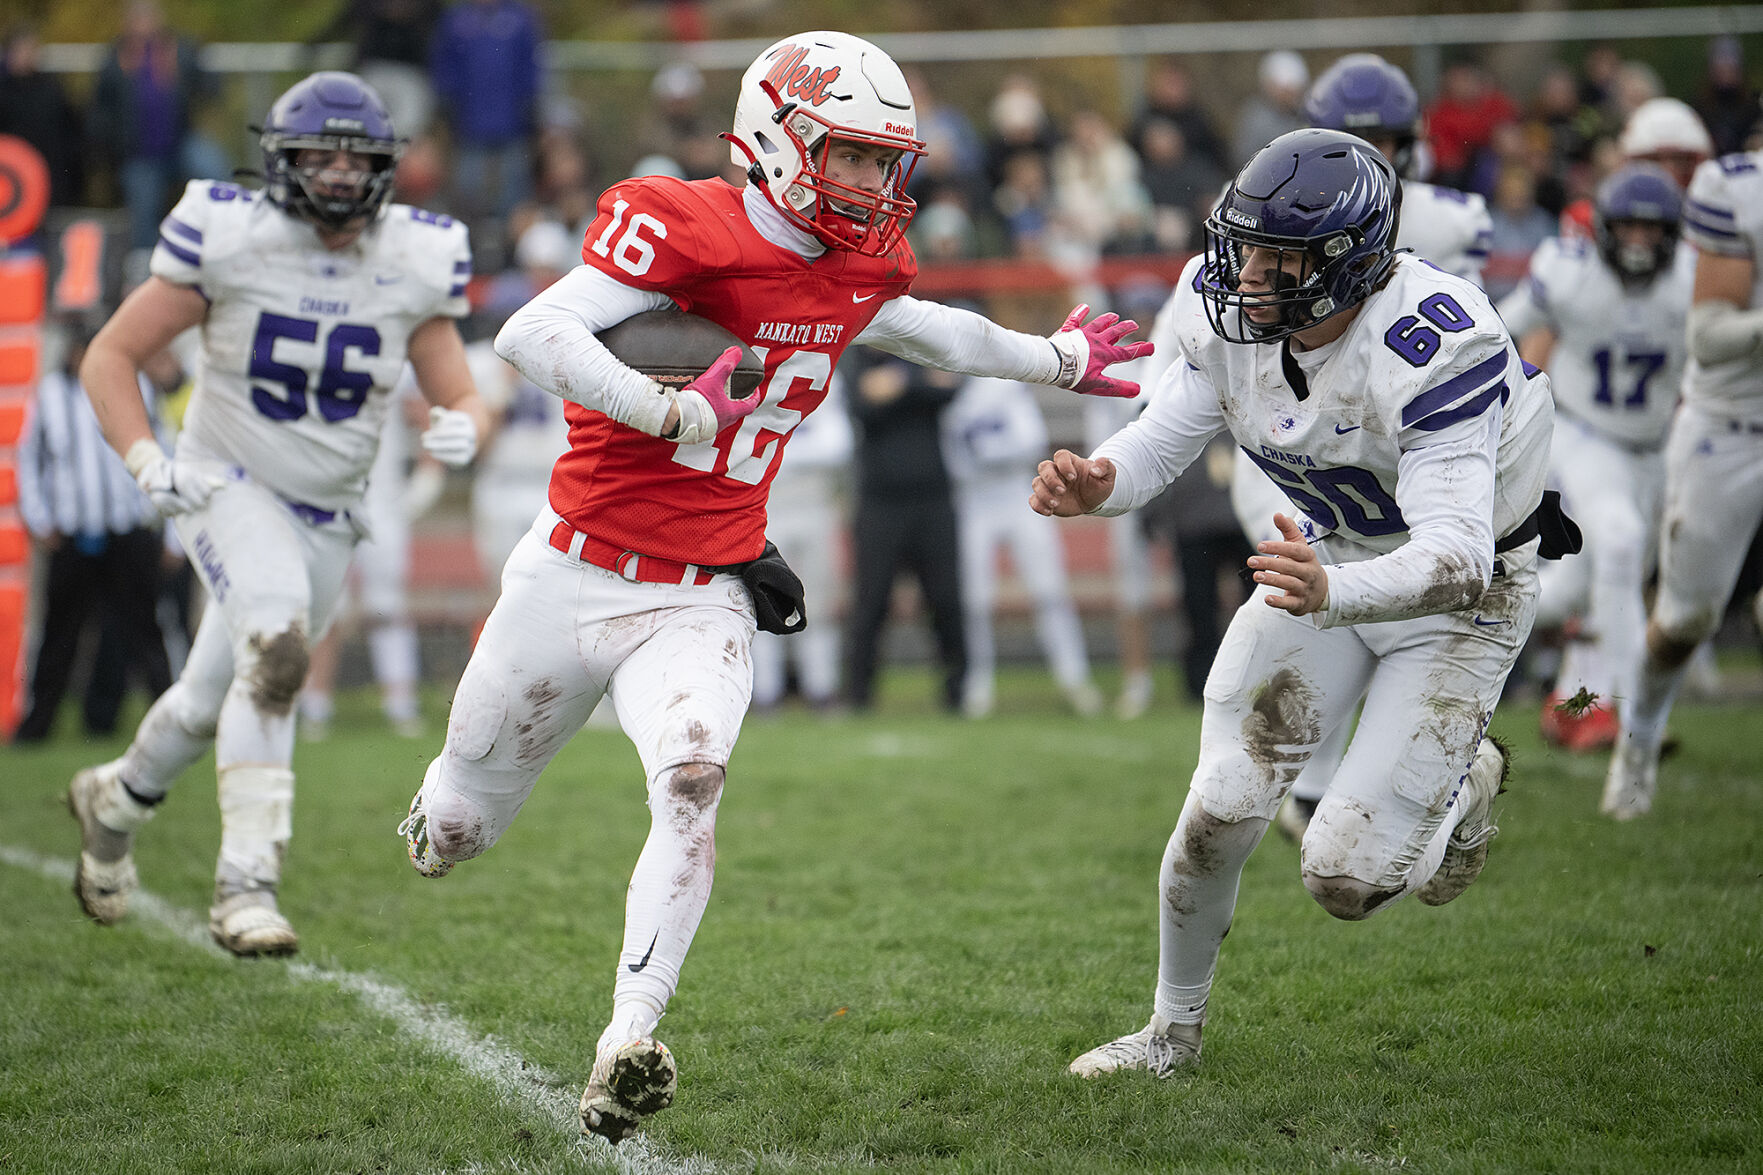 Mankato West seeks revenge against Chanhassen in Section 2AAAAA championship game